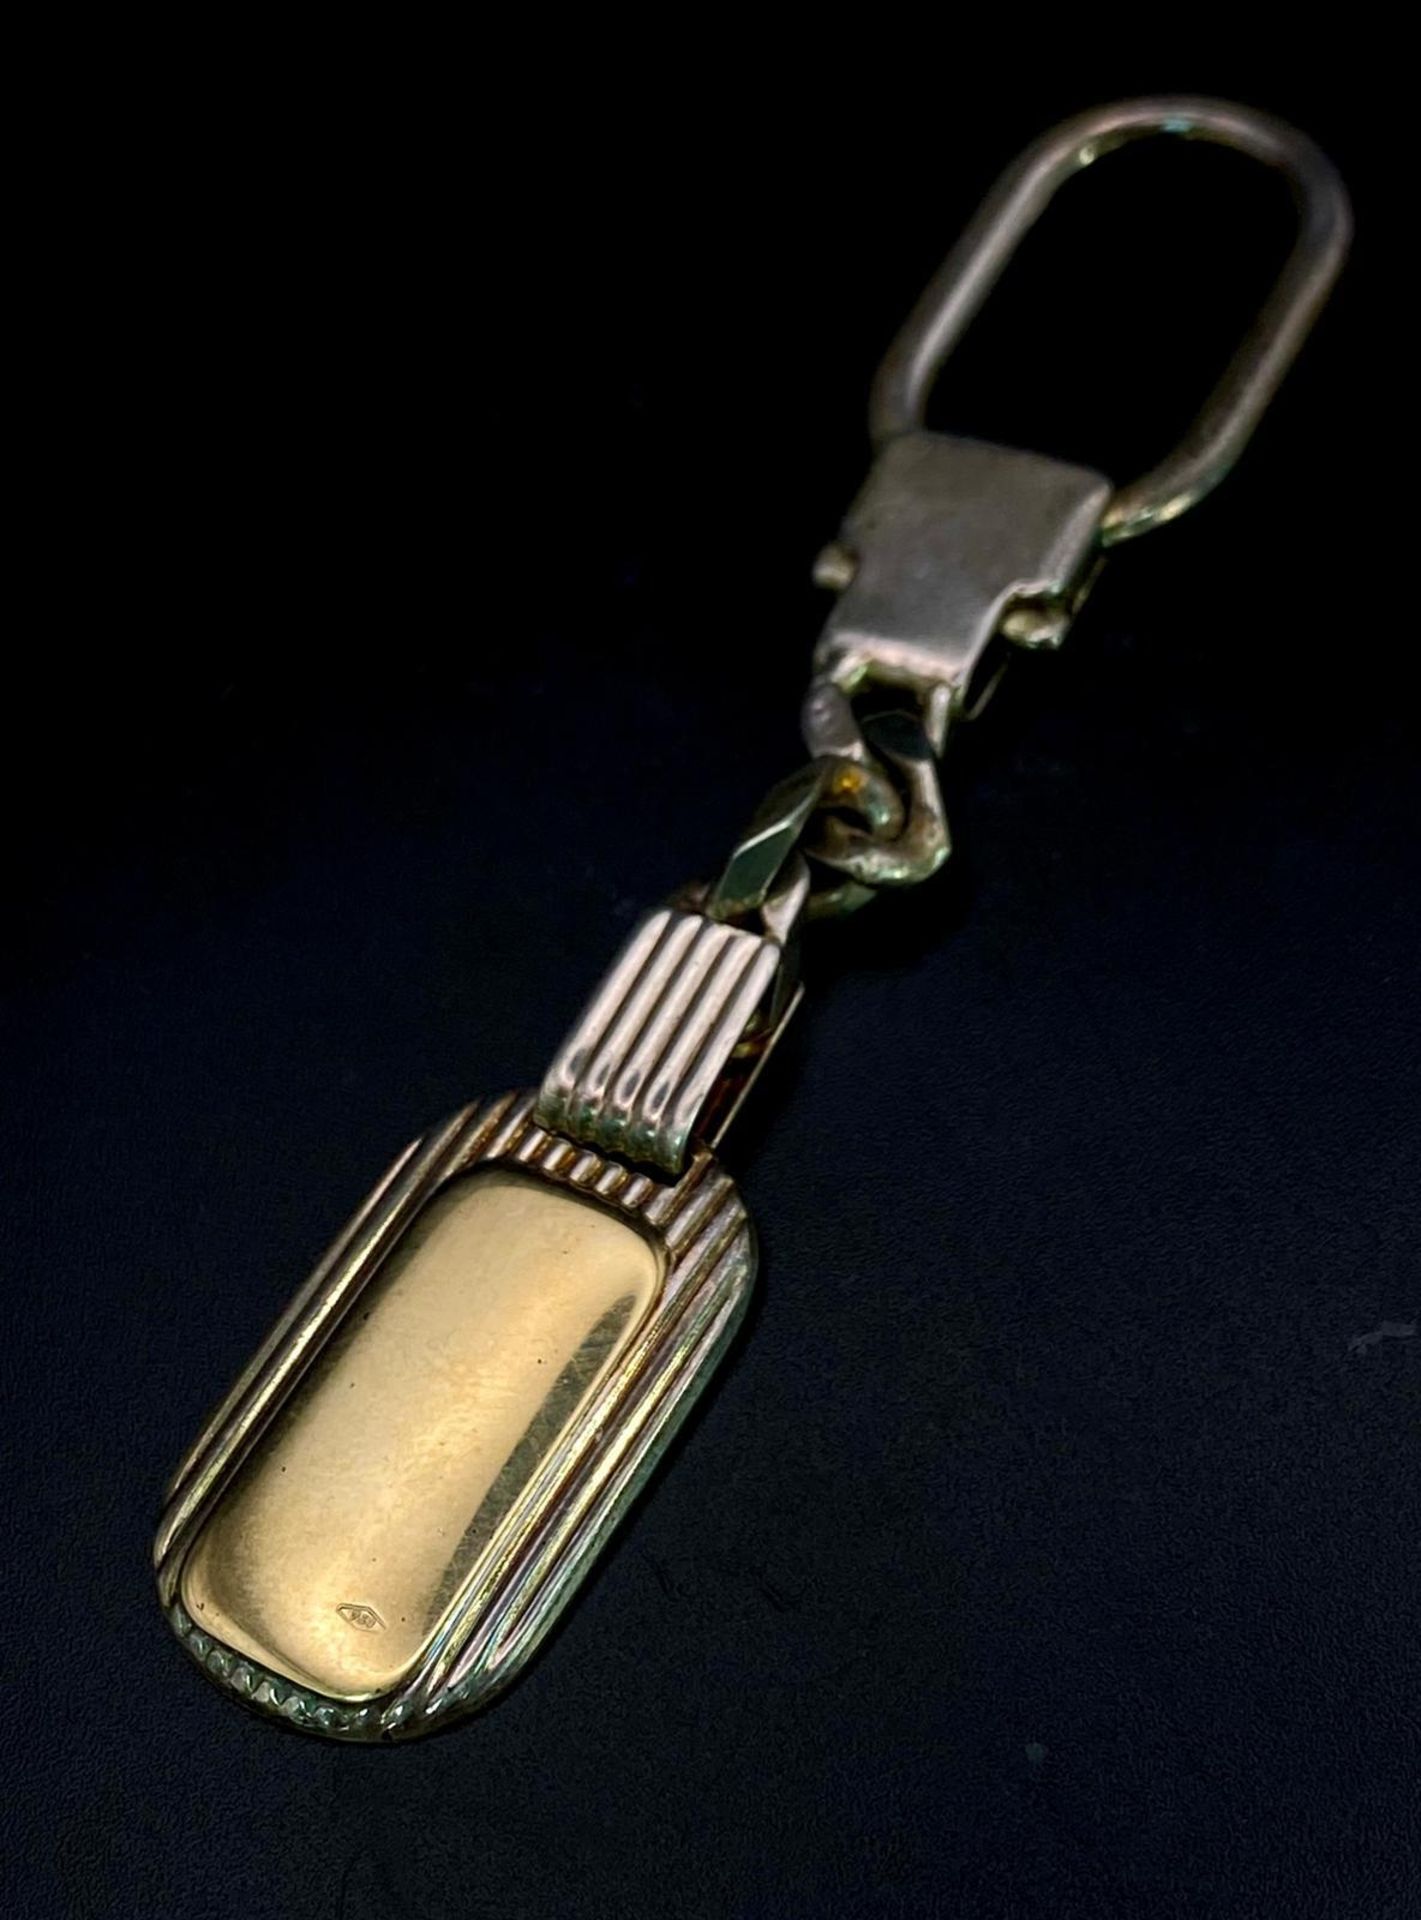 A Vintage Sterling Silver and 18K Gold Key Ring. Constructed from different parts of previous